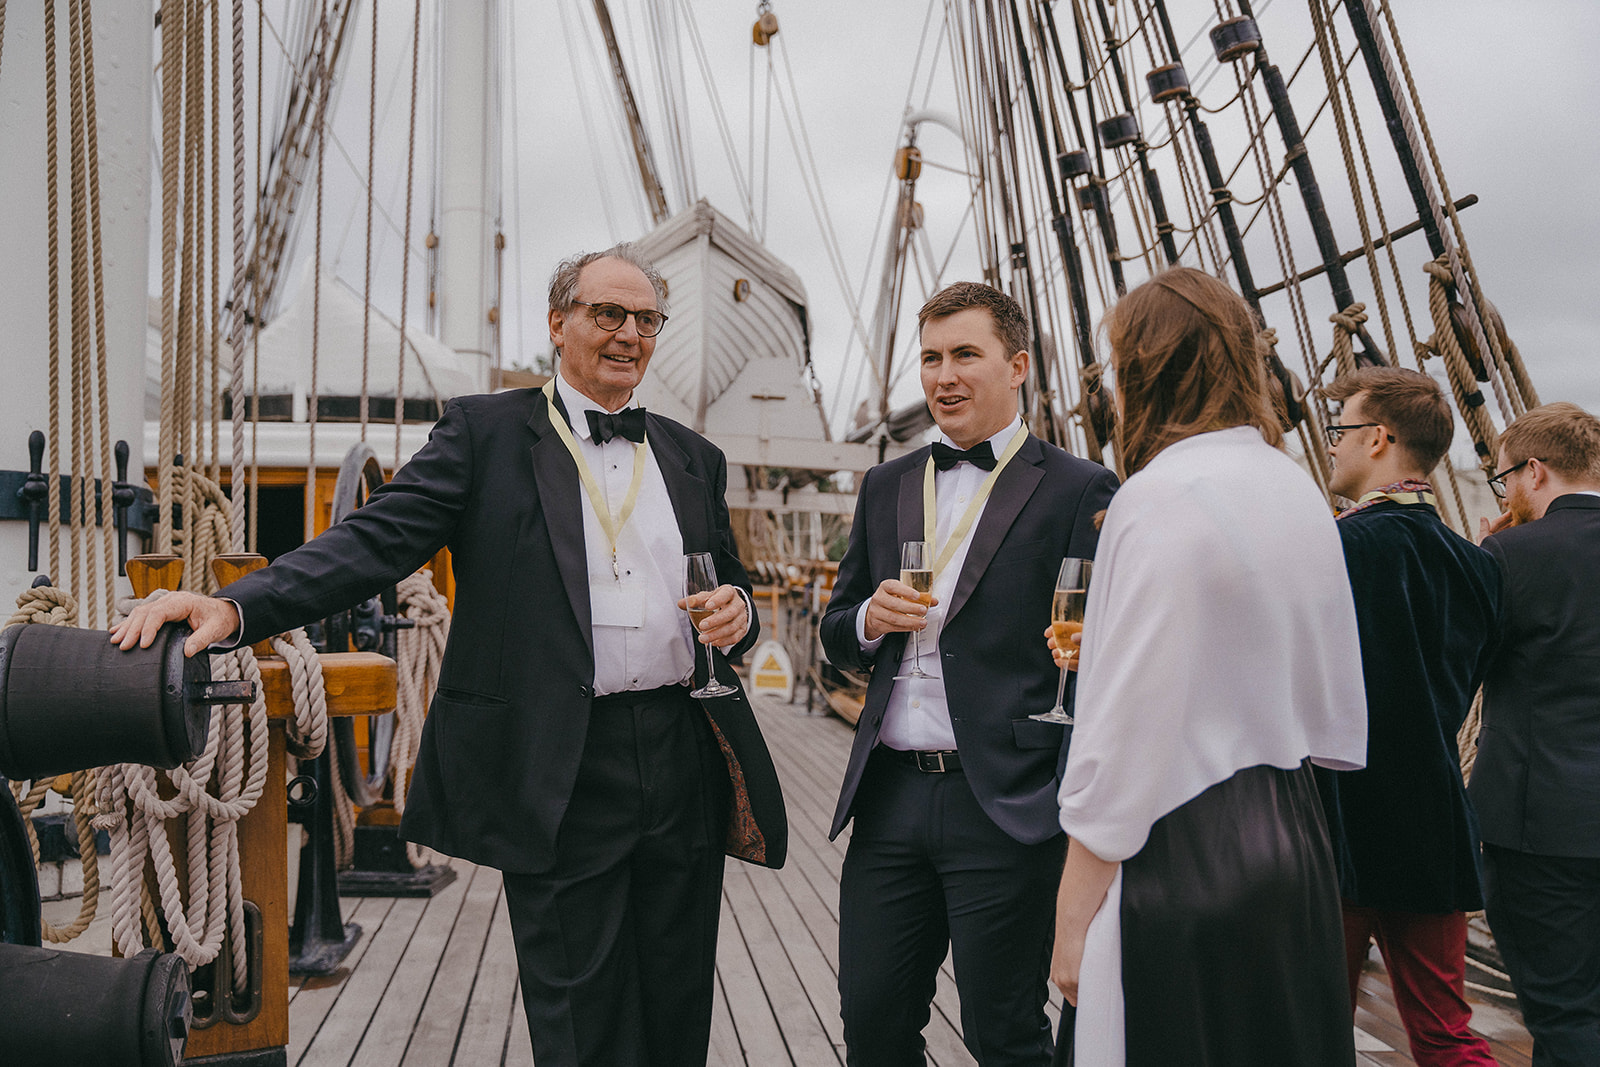 Alumni chat amongst themselves on the deck of the Cutty Sark with champagne in hand.